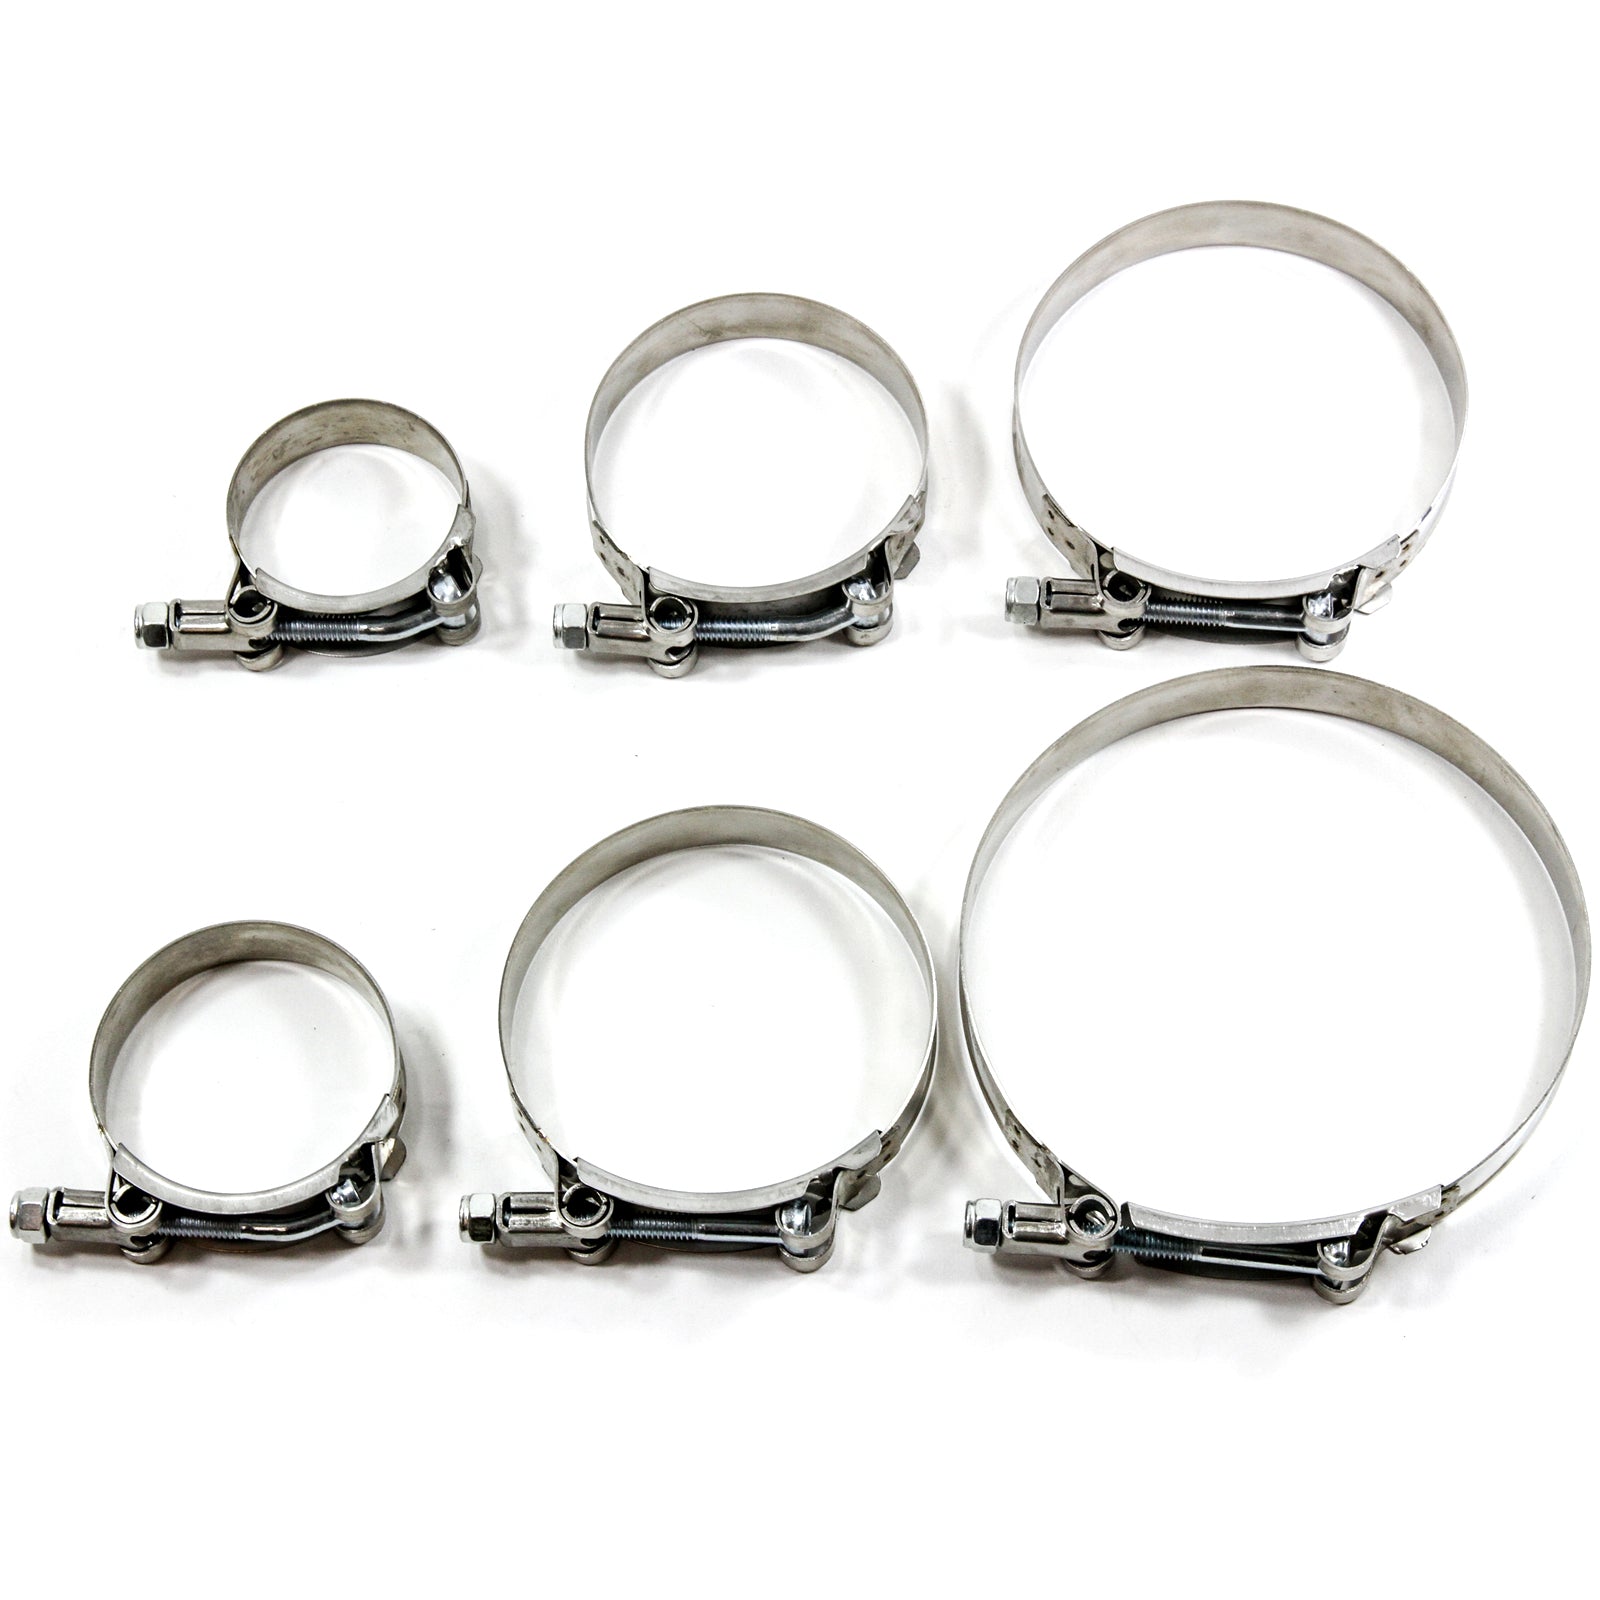 1 ea Bulk of Stainless Metal Steel Hose Clamps Assortment Hoseclamp Variety 6pc